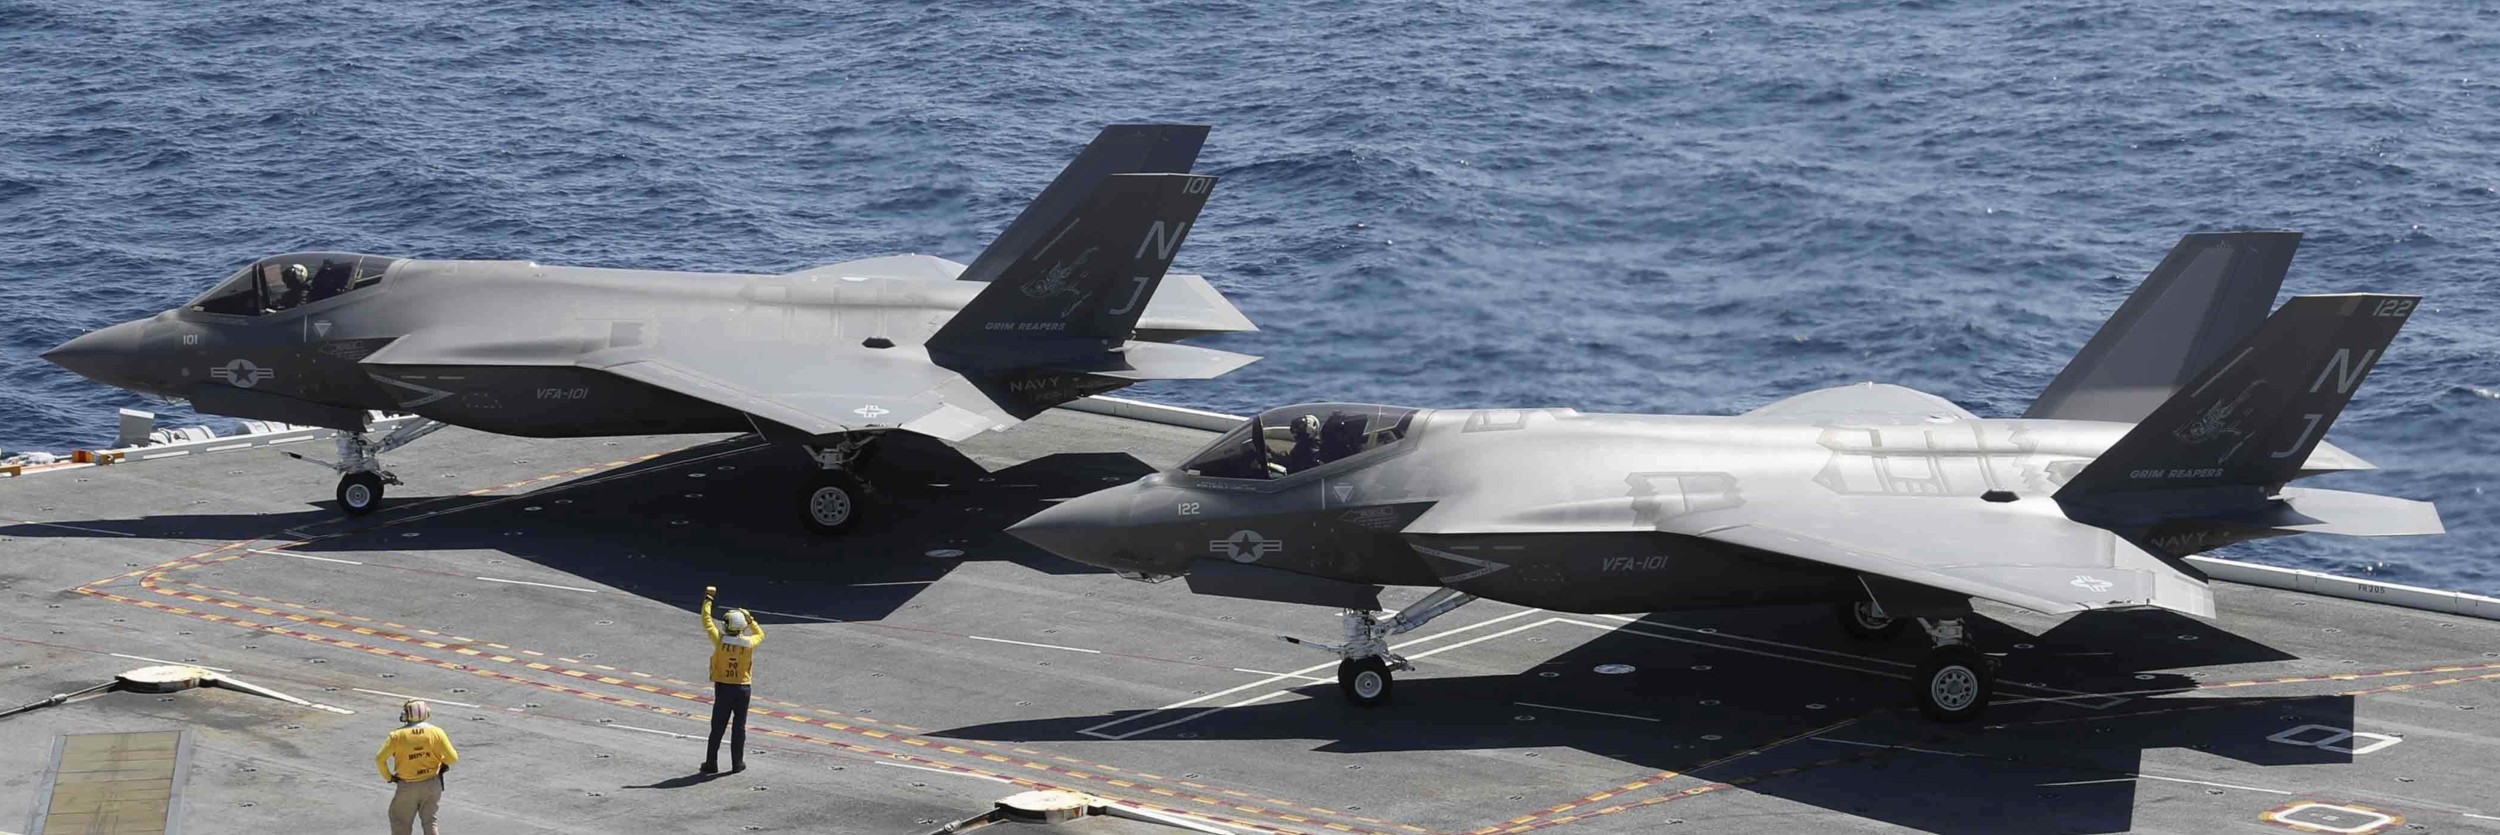 vfa-101 grim reapers strike fighter squadron f-35c lightning ii us navy 35